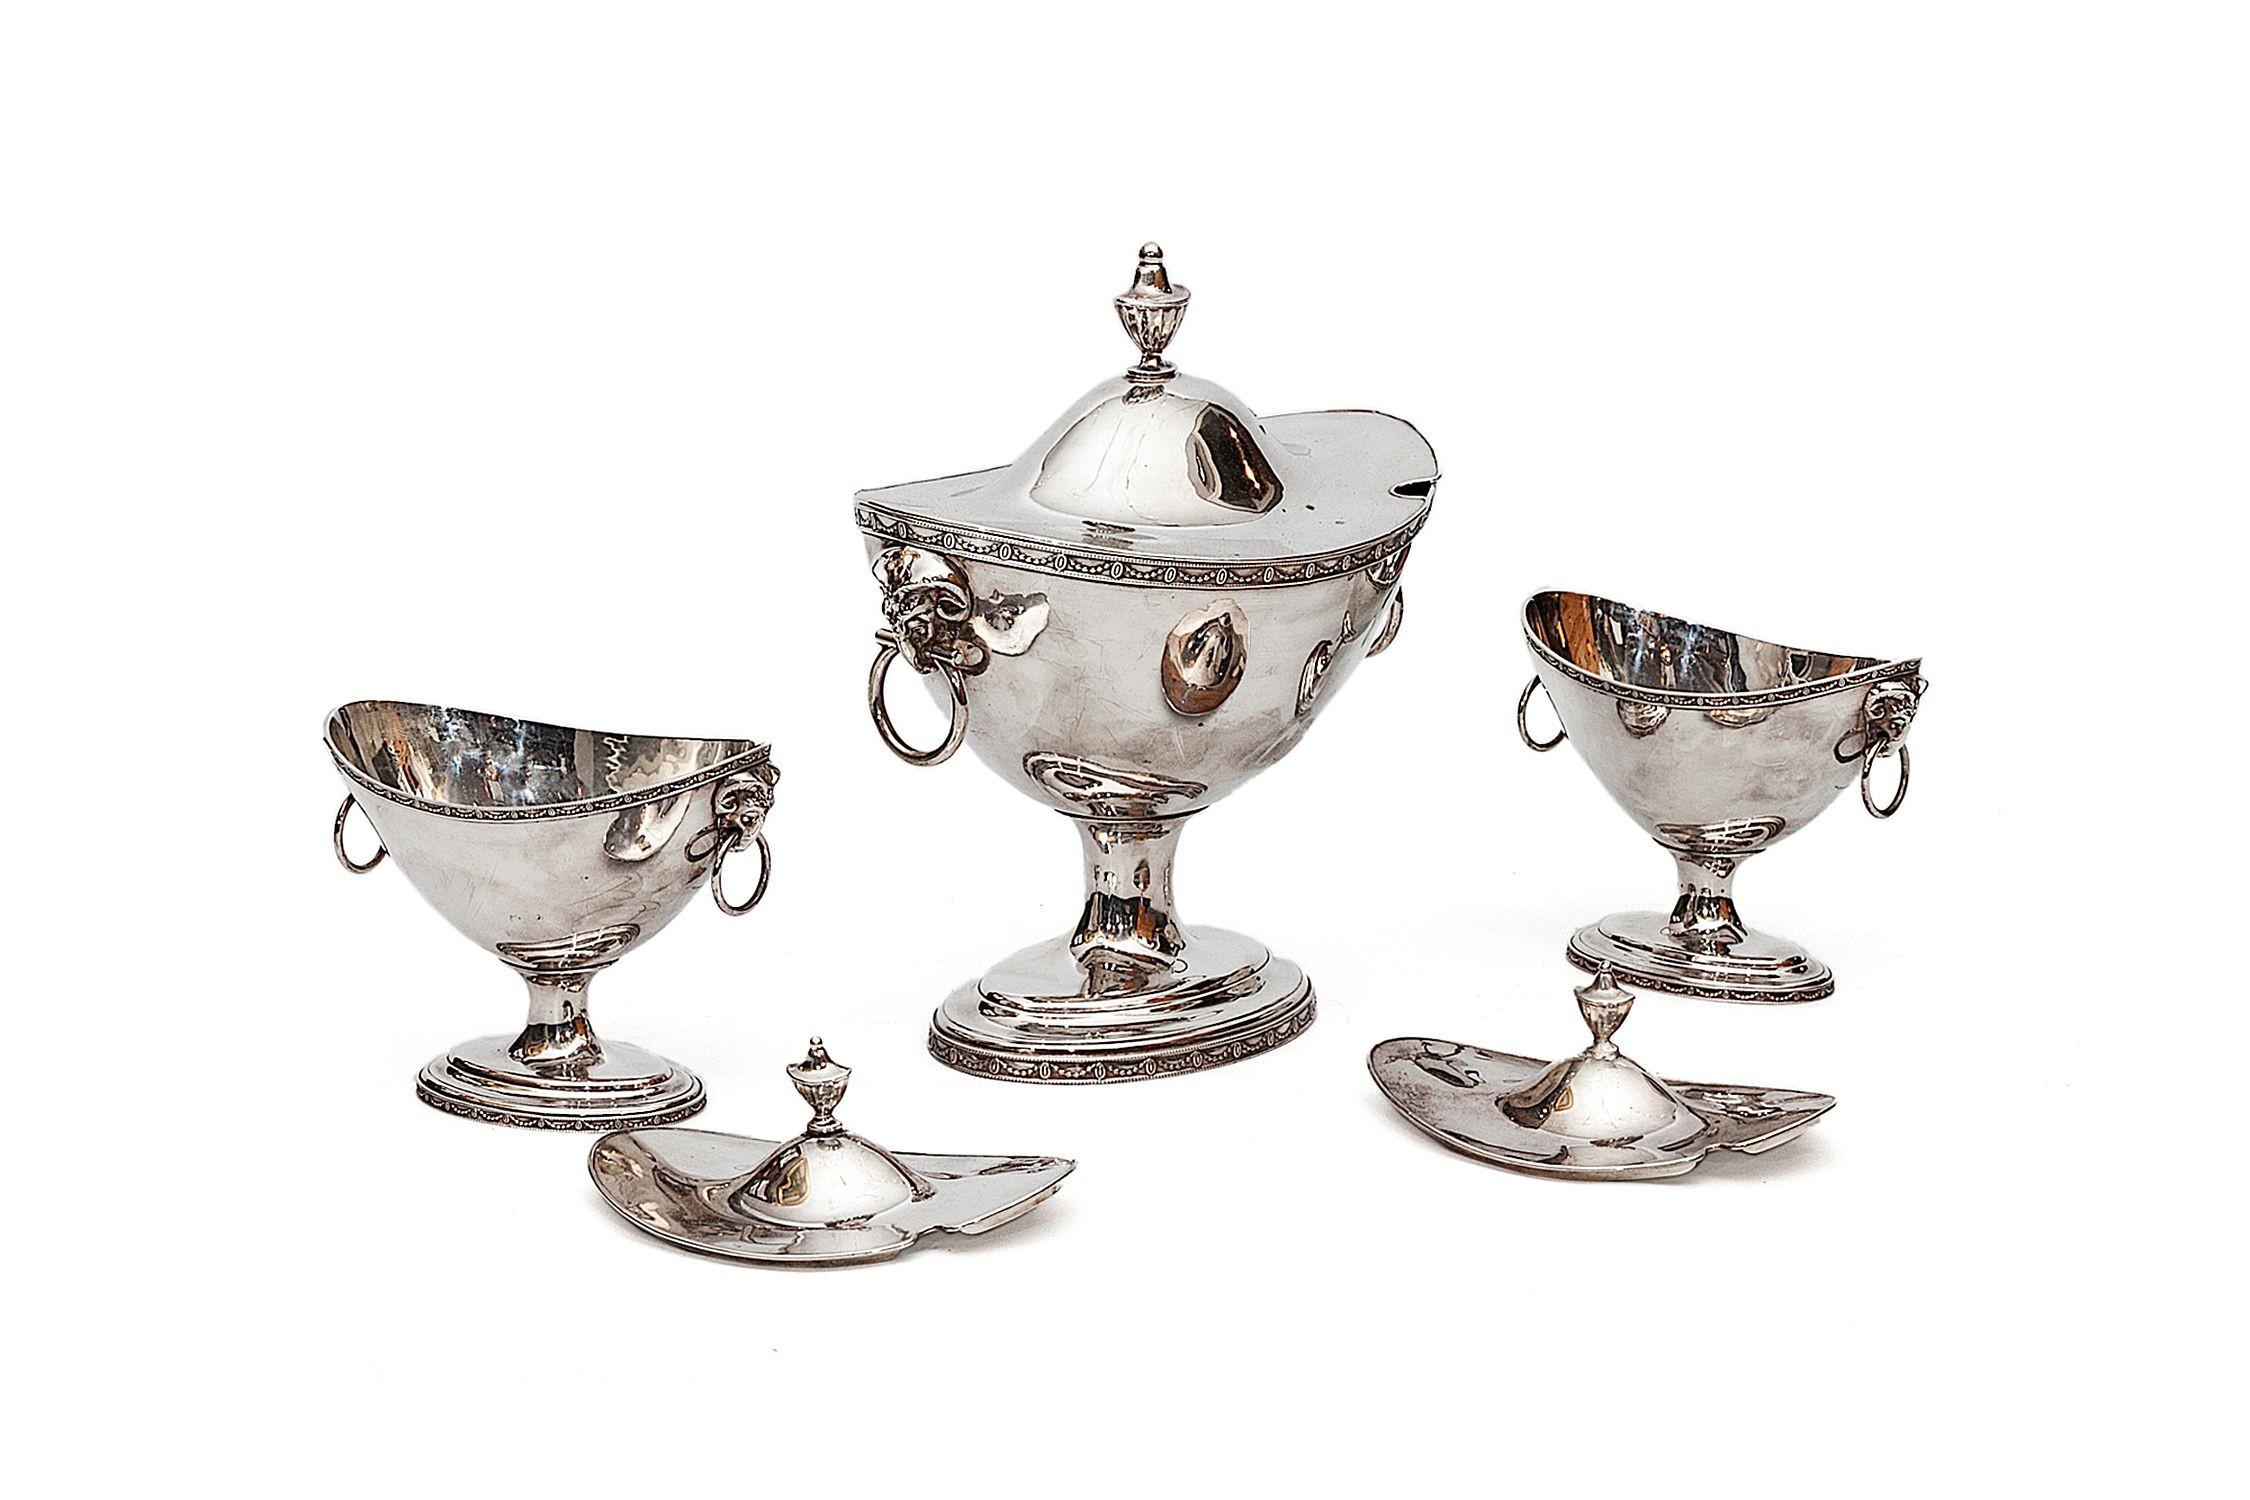 These three Georgian boat-form sauce tureens are an exemplary Neoclassical set, each atop a spreading oval foot and with ring handles. The shaped lids are ornamented with urn-shaped finials.

One Large: 12